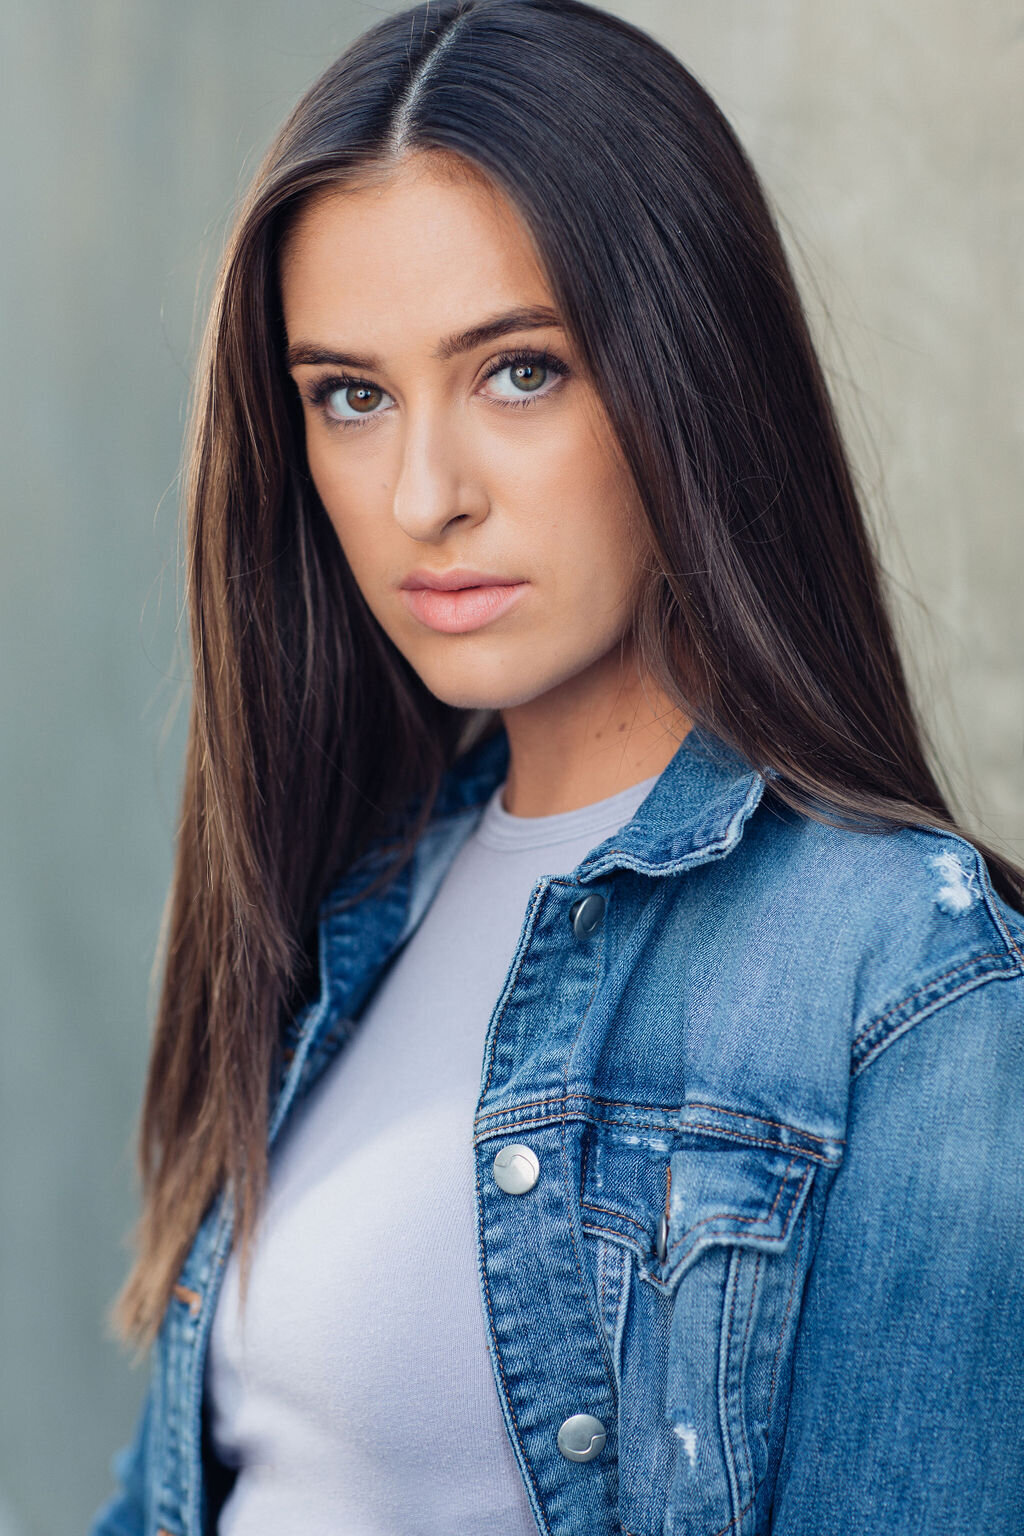 Headshot Photograph Of Young Woman In Blue Denim Jacket And Inner Lavender Shirt Los Angeles